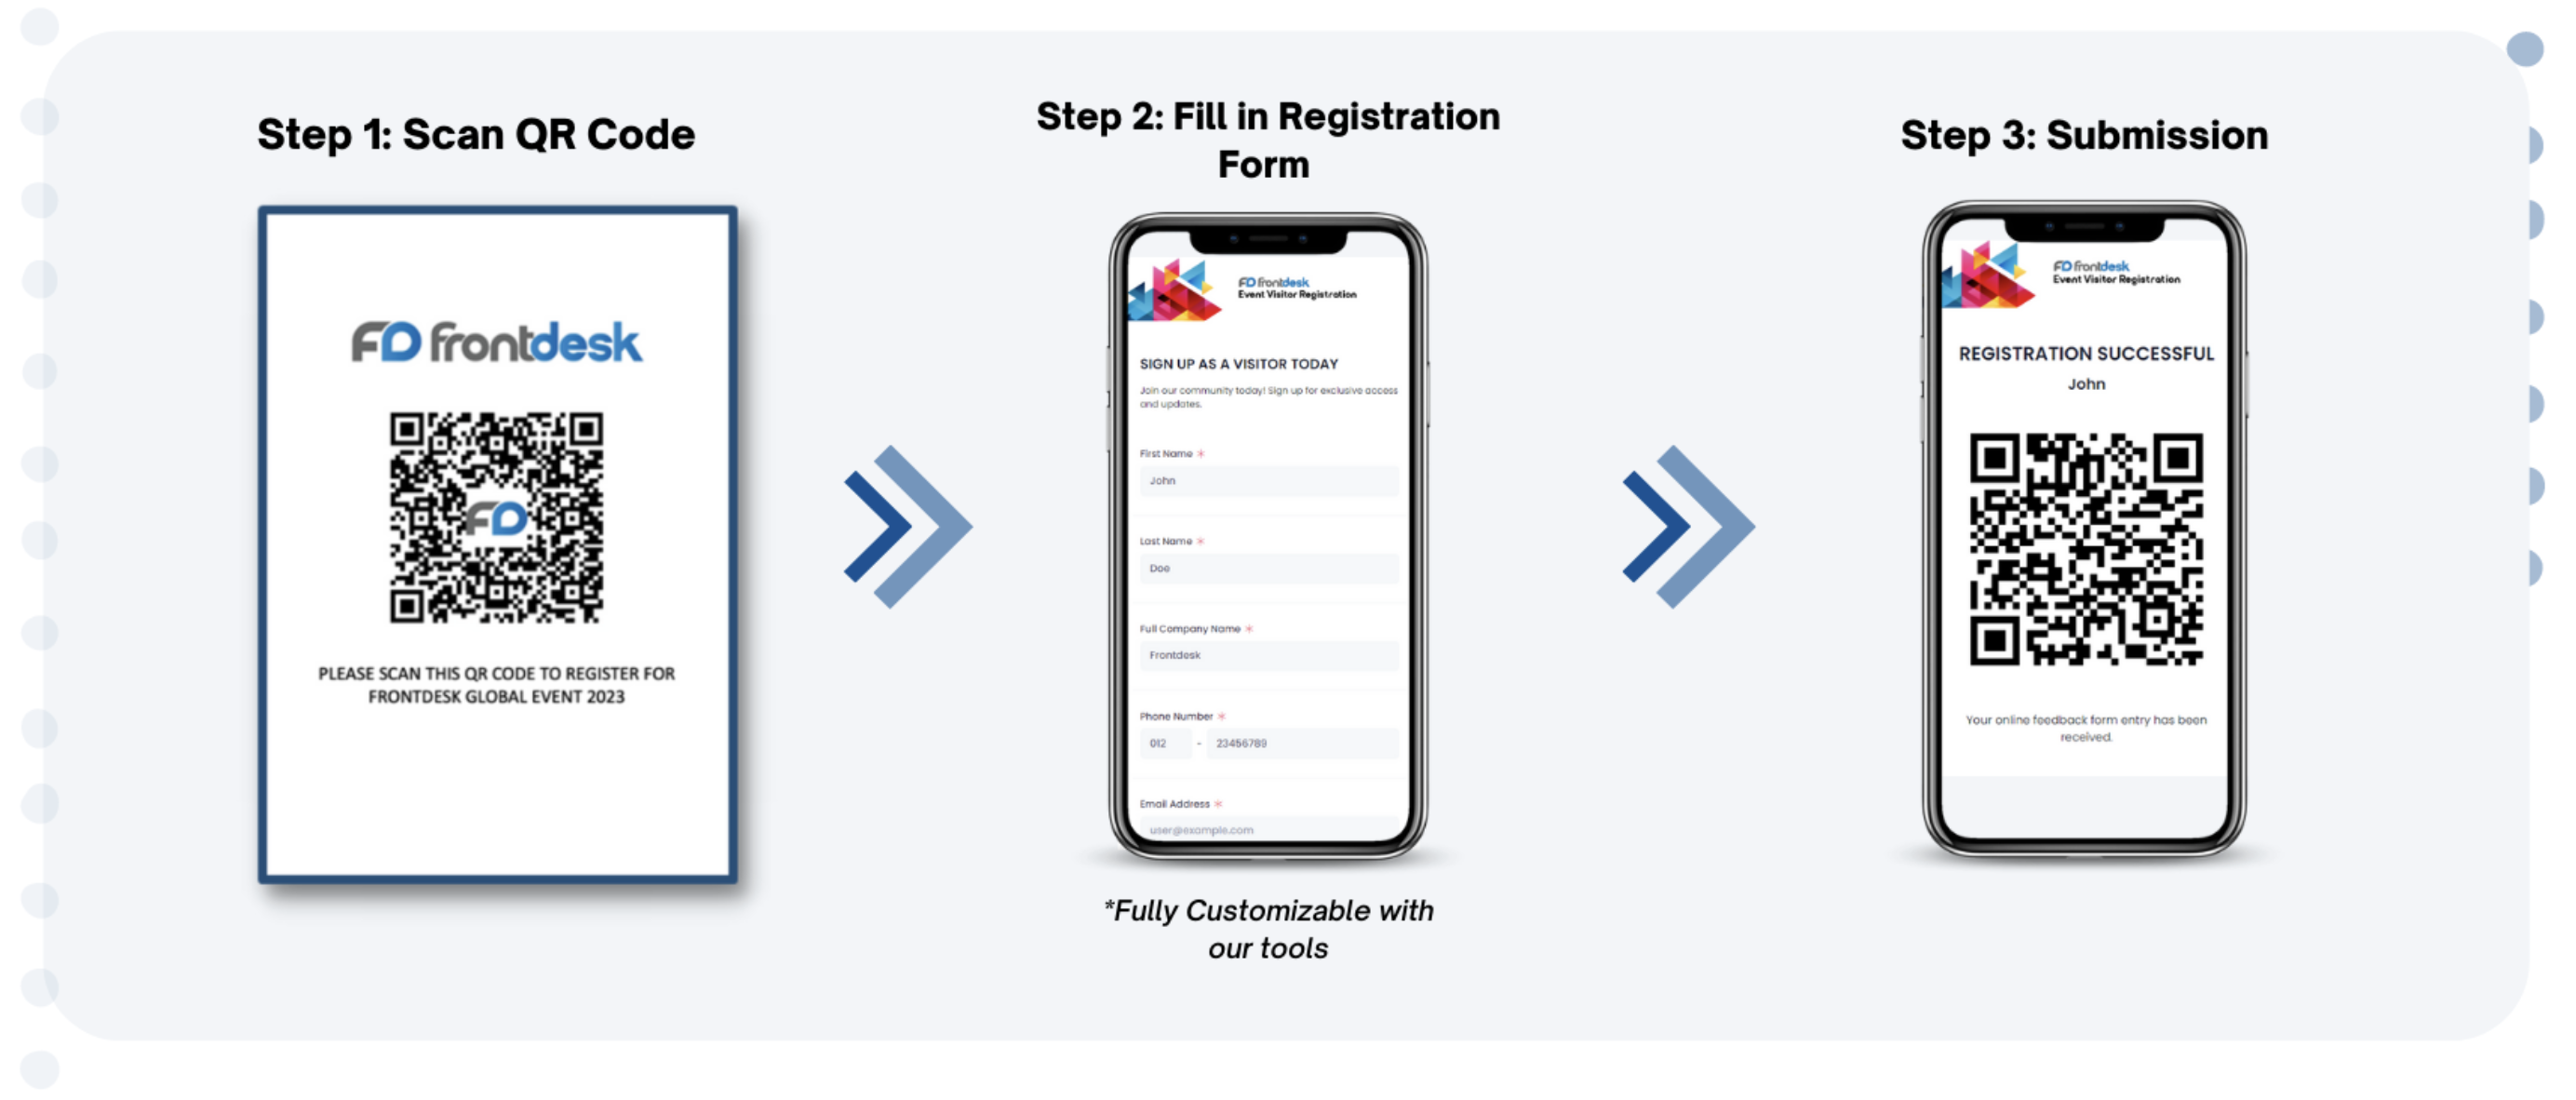 Alt for On-Site Registration with 3 Steps: Scan QR Code, Register, and Submission.